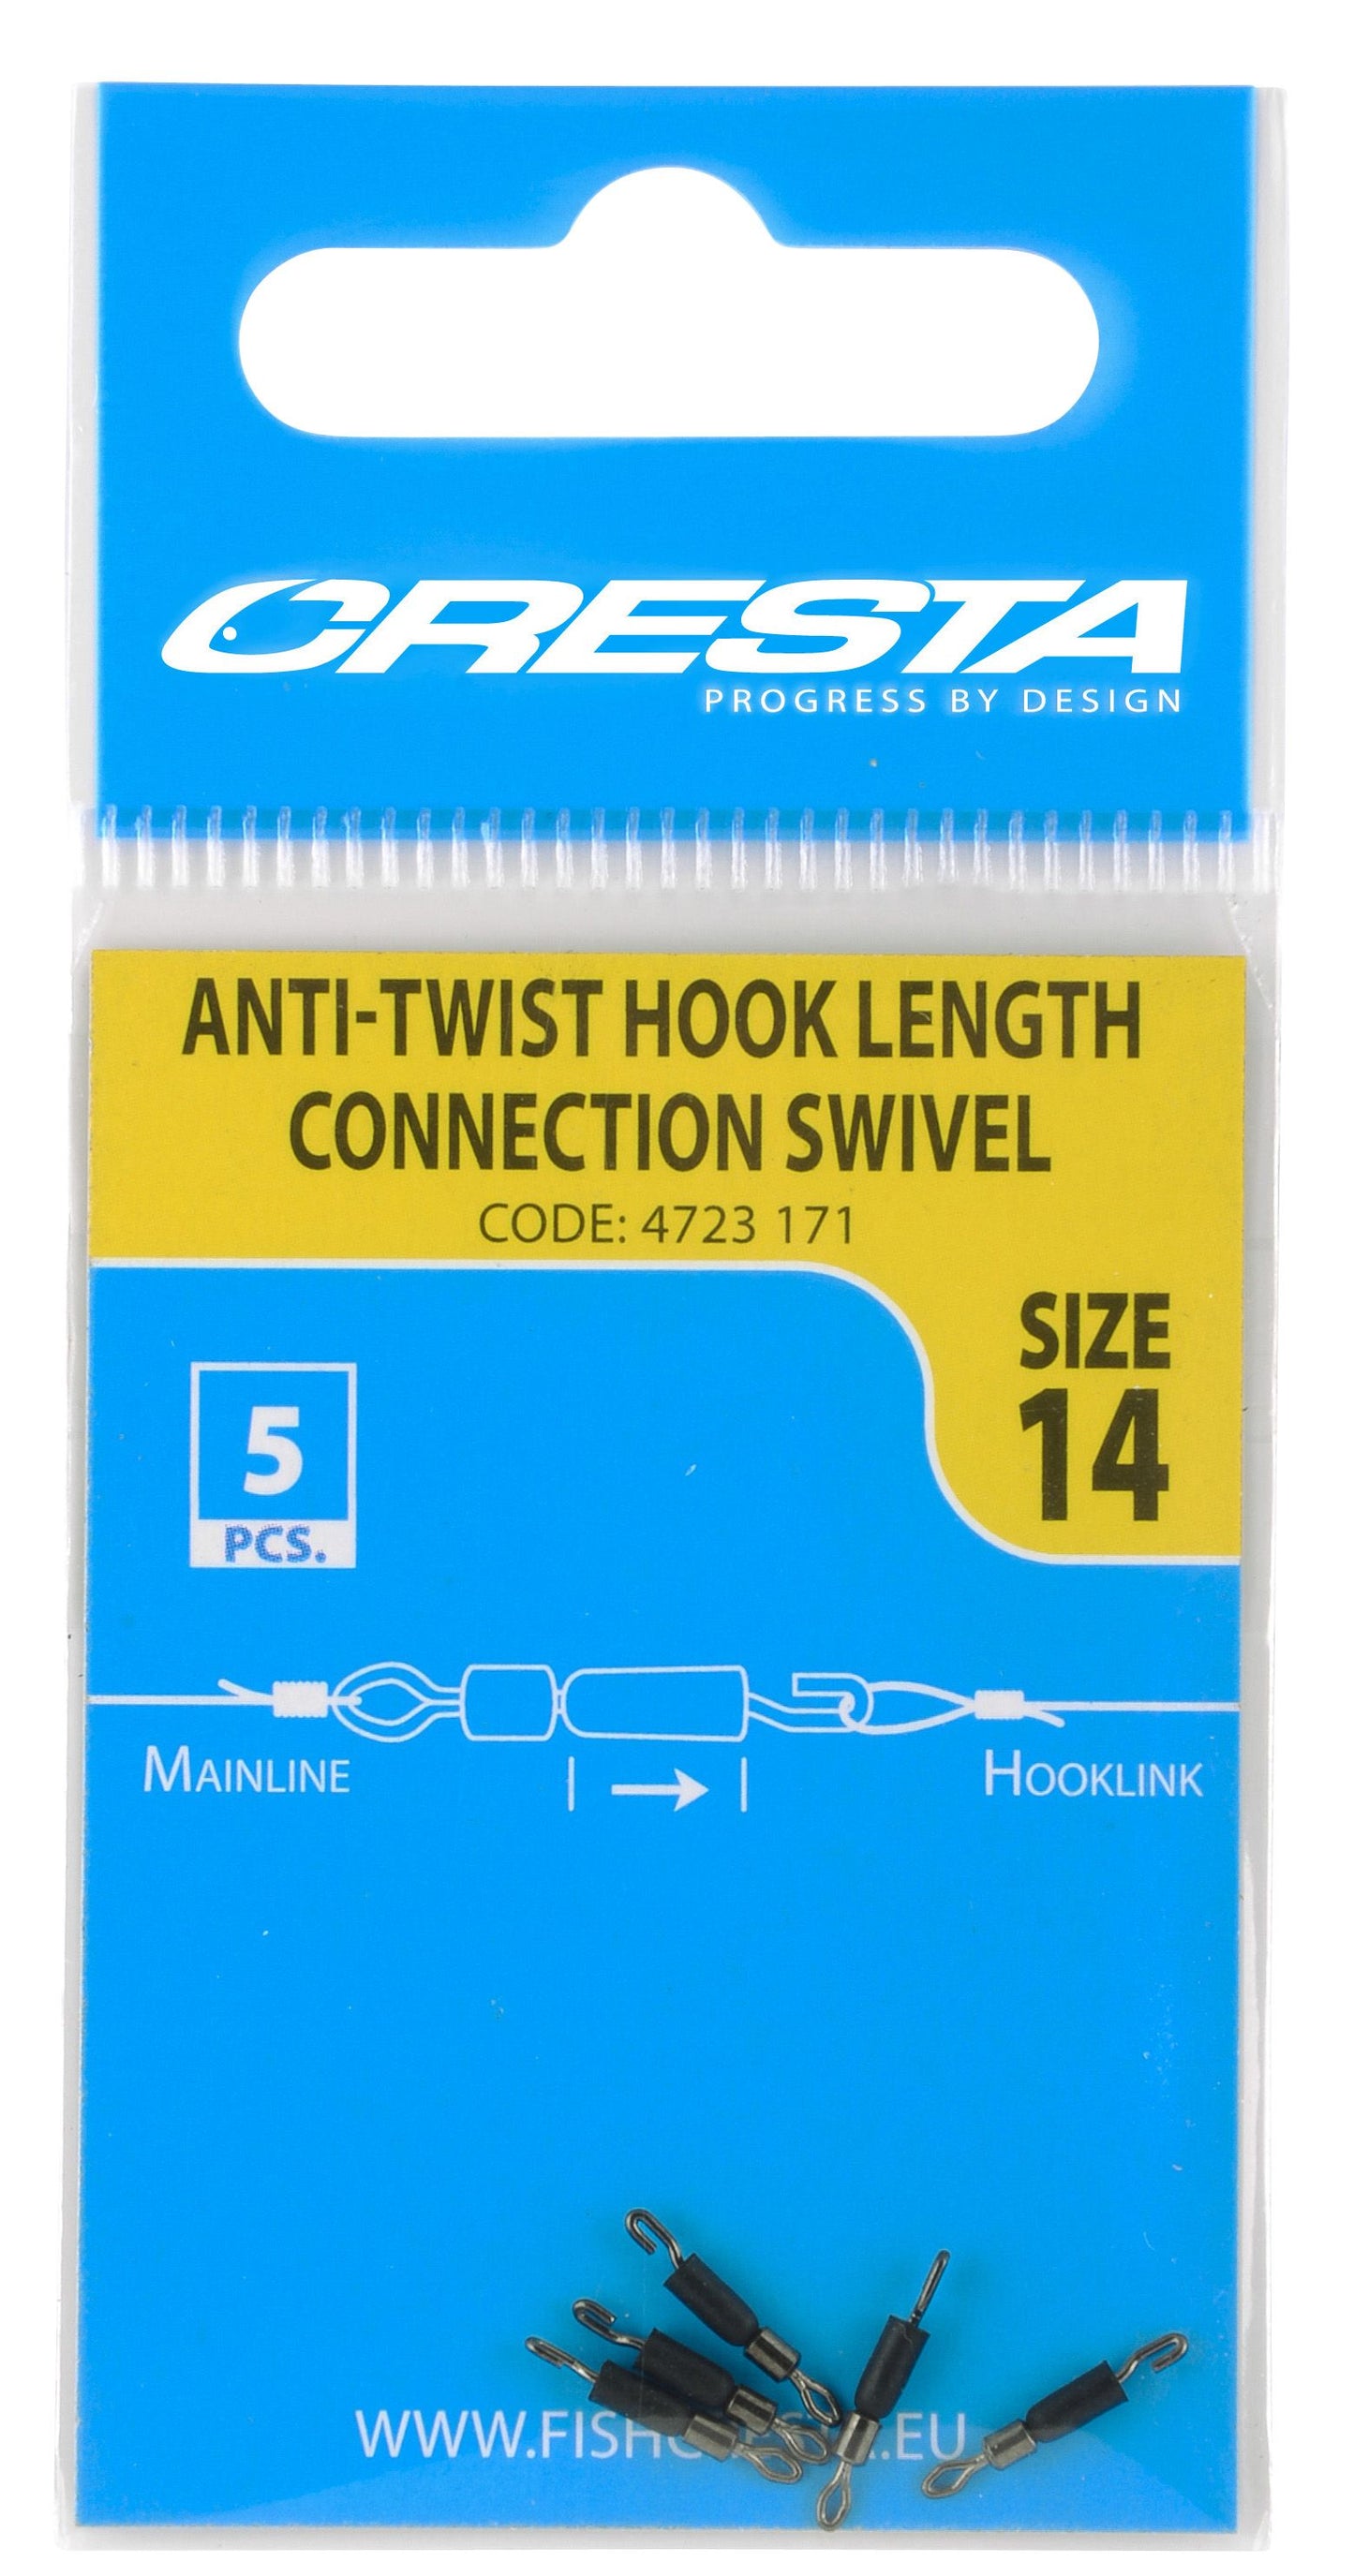 HOOKLENGTH CONNECTION SWIVEL